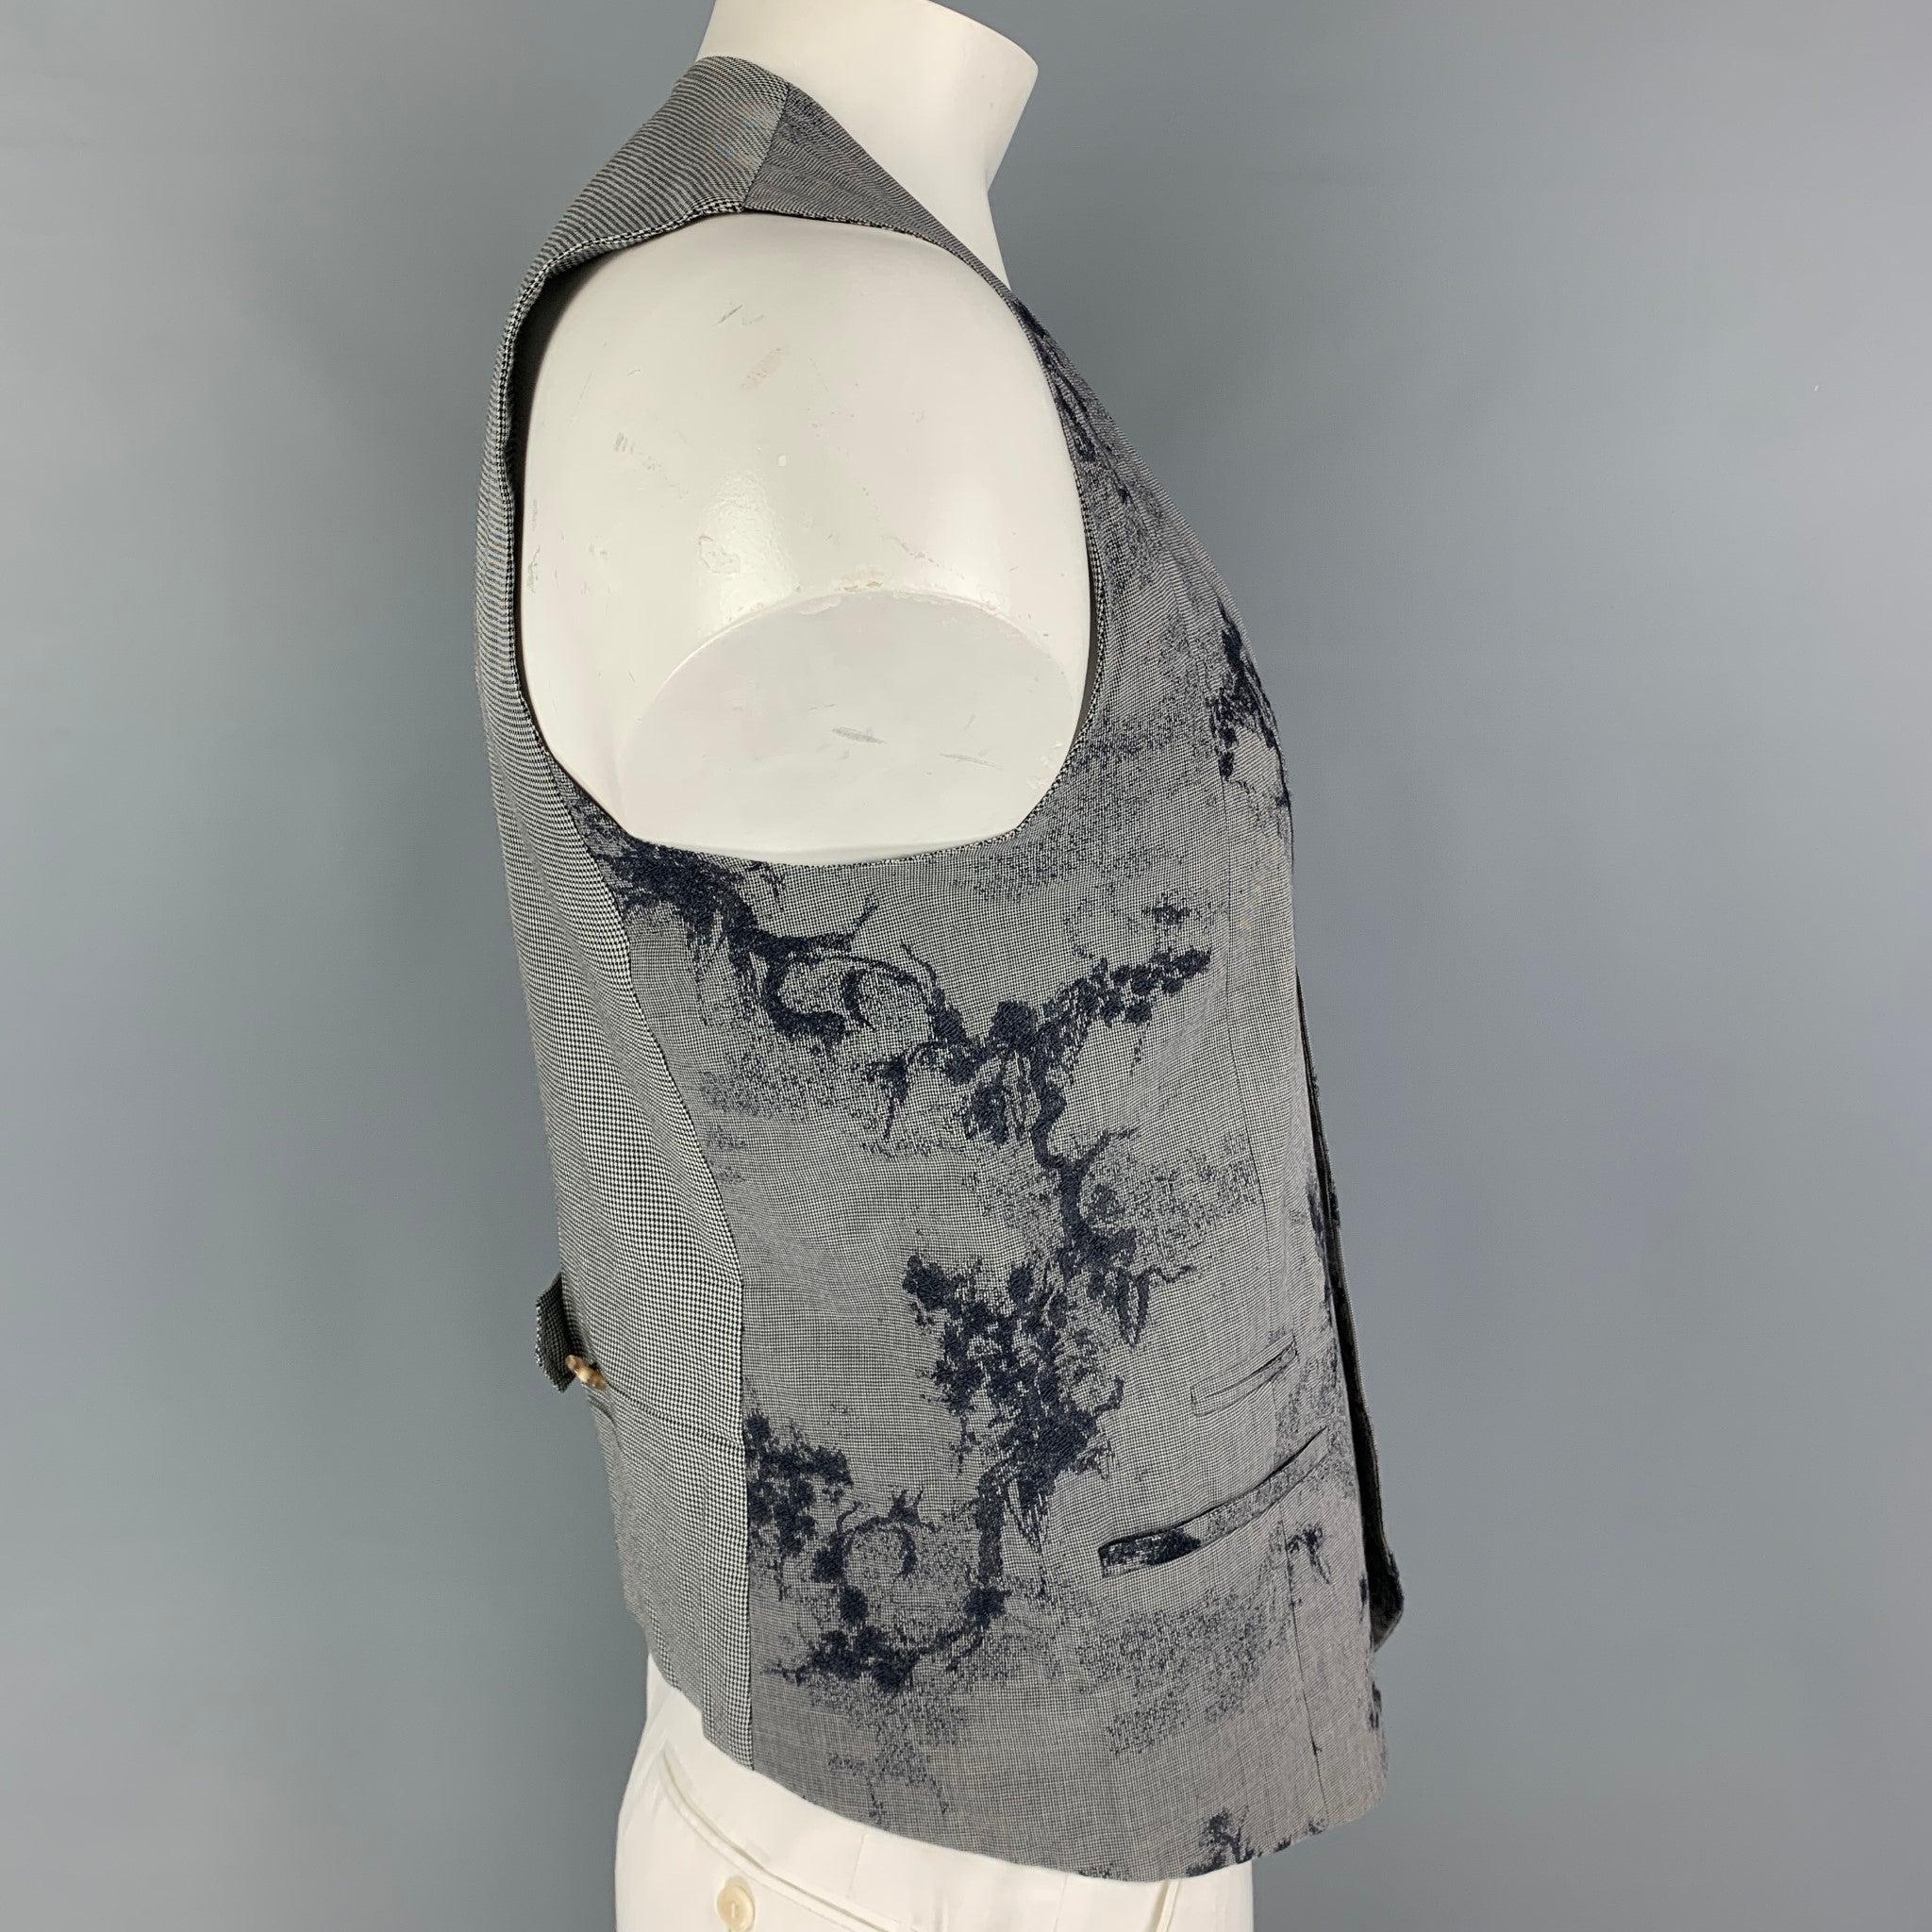 KENZO vest comes in a navy & white cotton blend featuring embroidered designs throughout, slit pockets, side tabs, and a buttoned closure. Made in France.
Good
Pre-Owned Condition. Minor discoloration at front. As-is.  

Marked:   52 

Measurements: